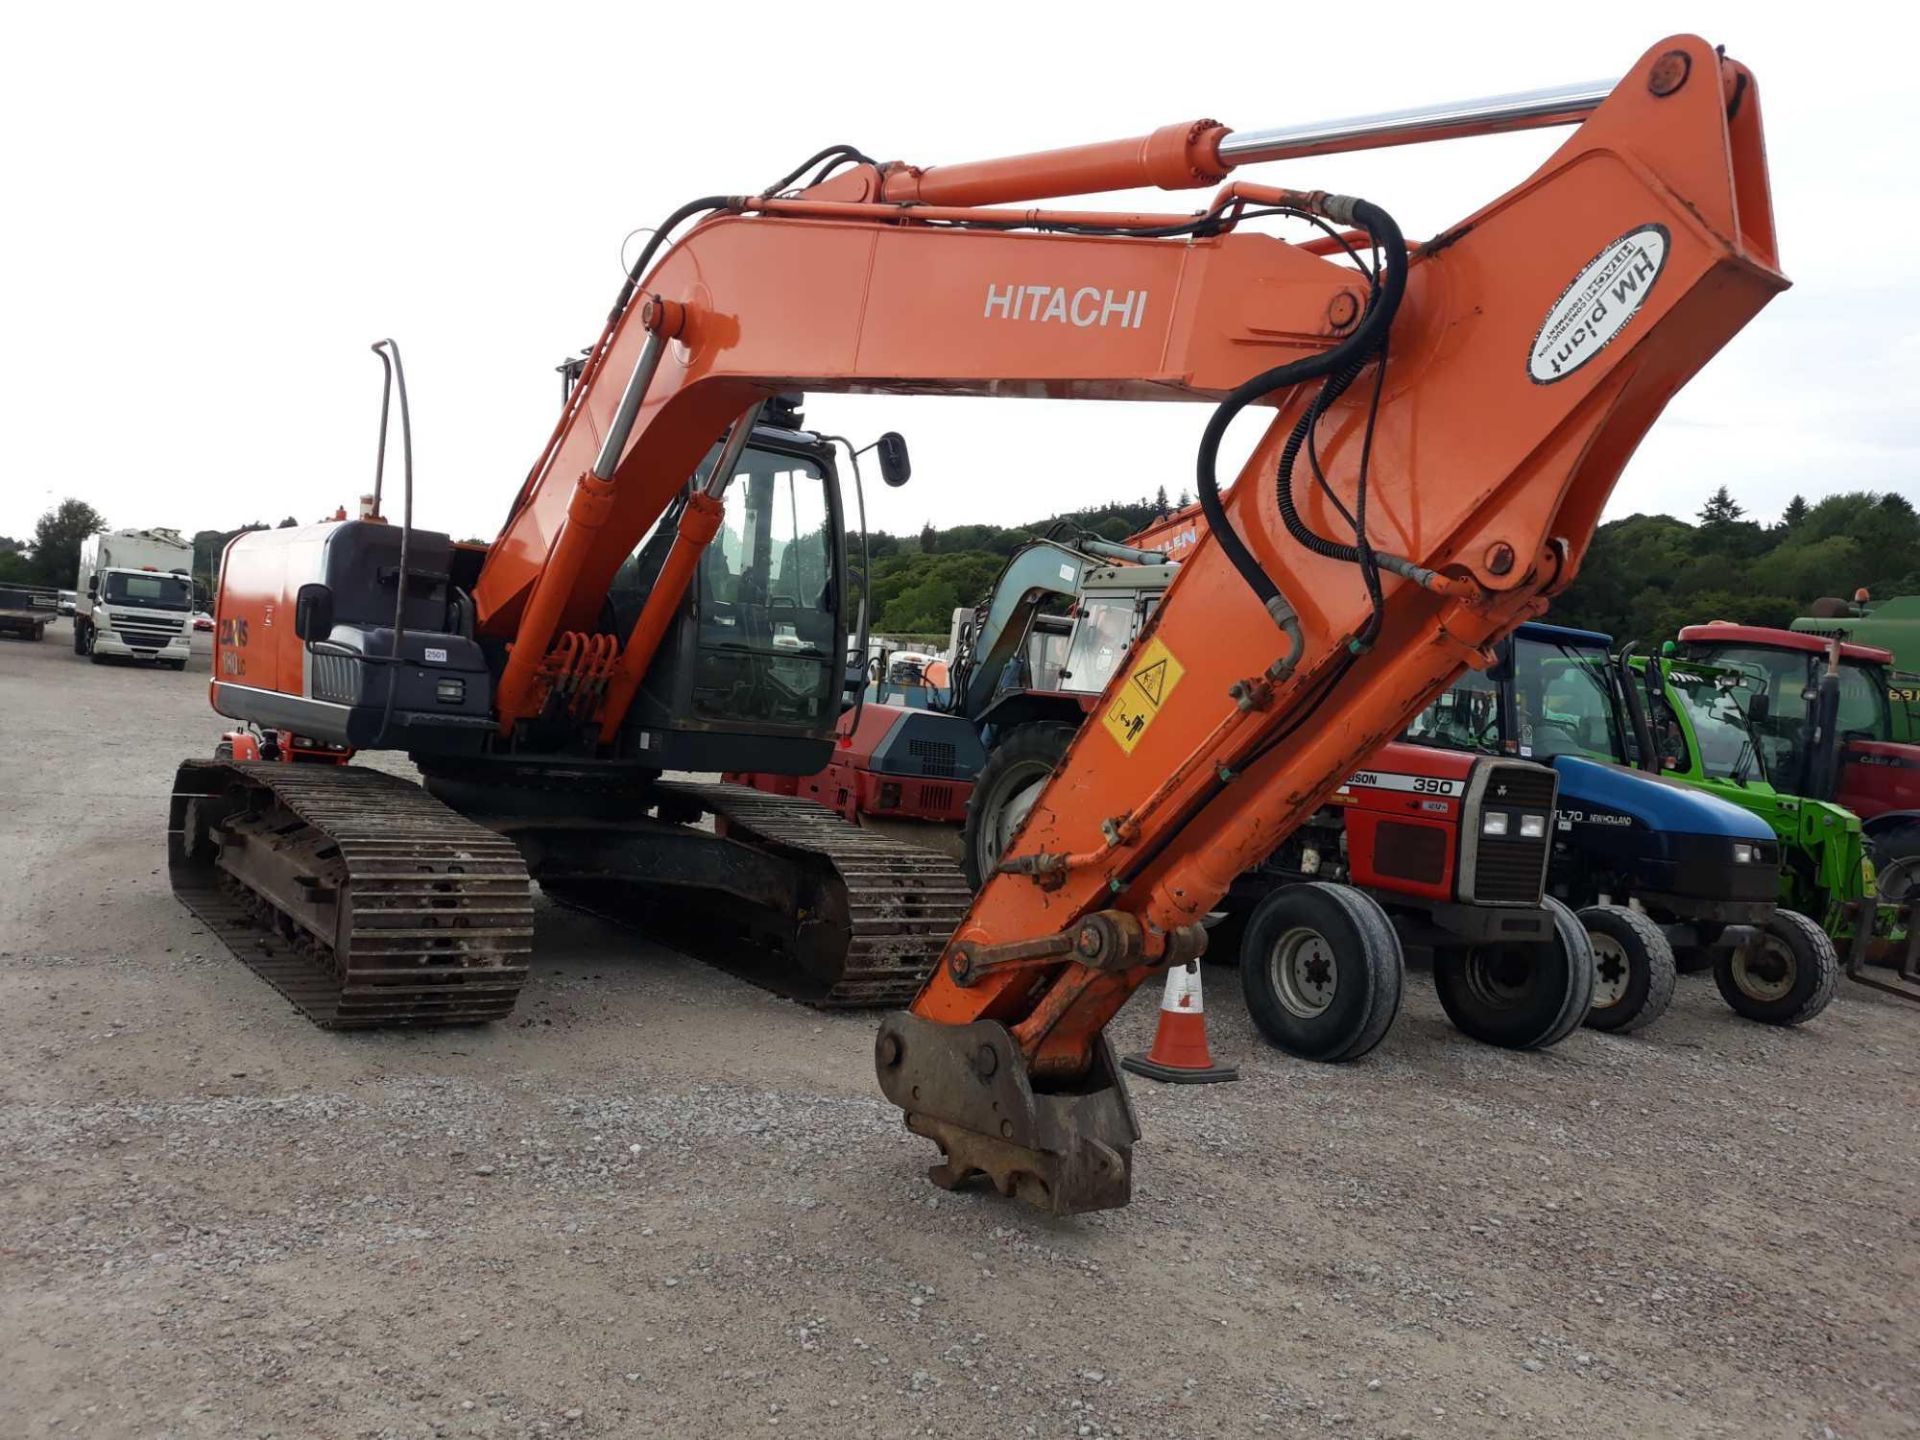 Hitachi ZX180LC-3 Excavator, Year 2008, 8140 hours displayed - not warranted, Key in PC, + VAT - Image 4 of 6